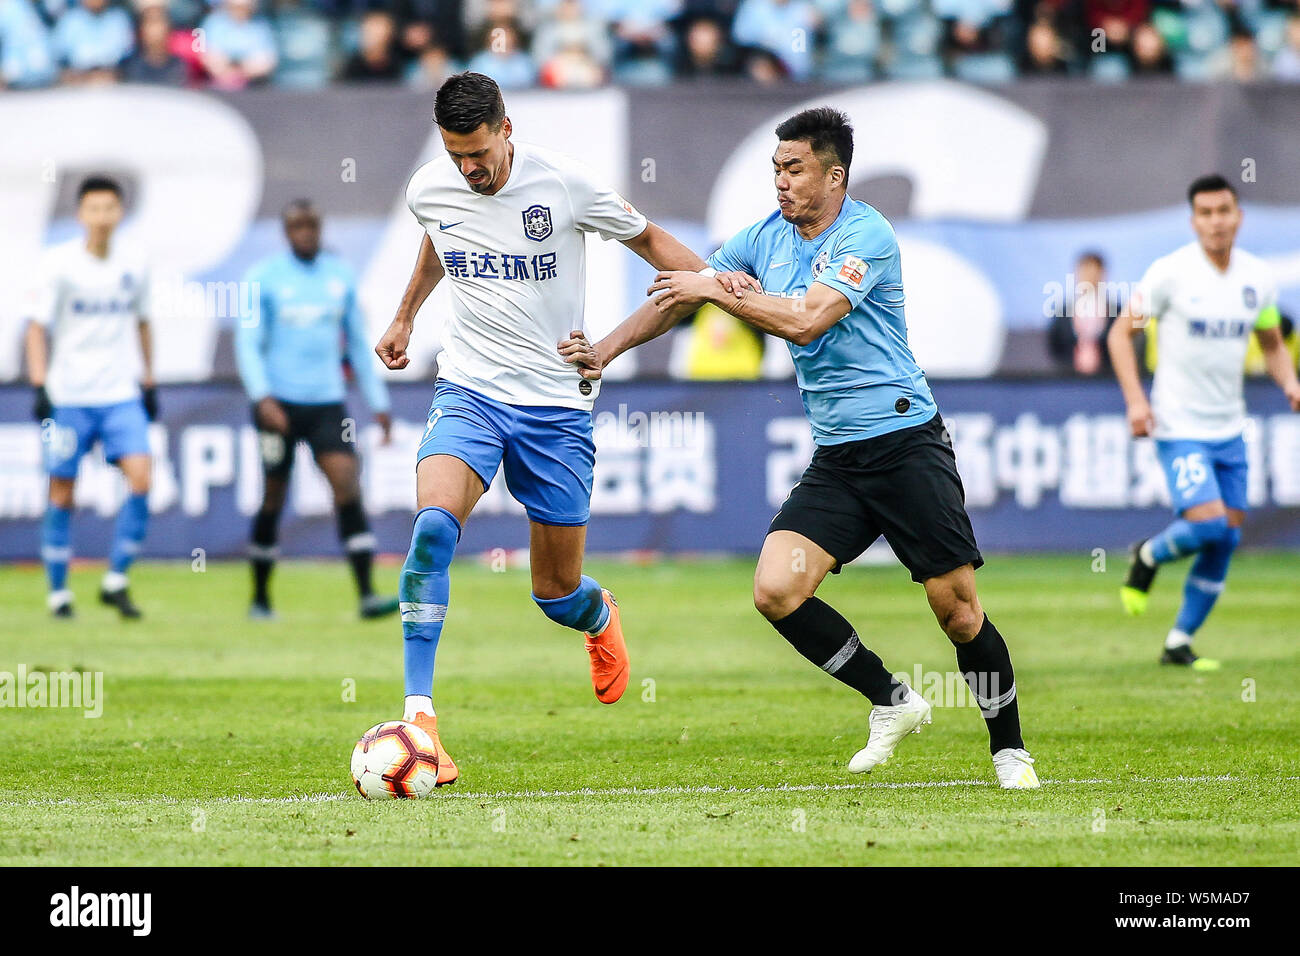 German football player Sandro Wagner, left, of Tianjin TEDA F.C. challenges Zhao Xuri of Dalian Yifang F.C. in their 4th round match during the 2019 C Stock Photo